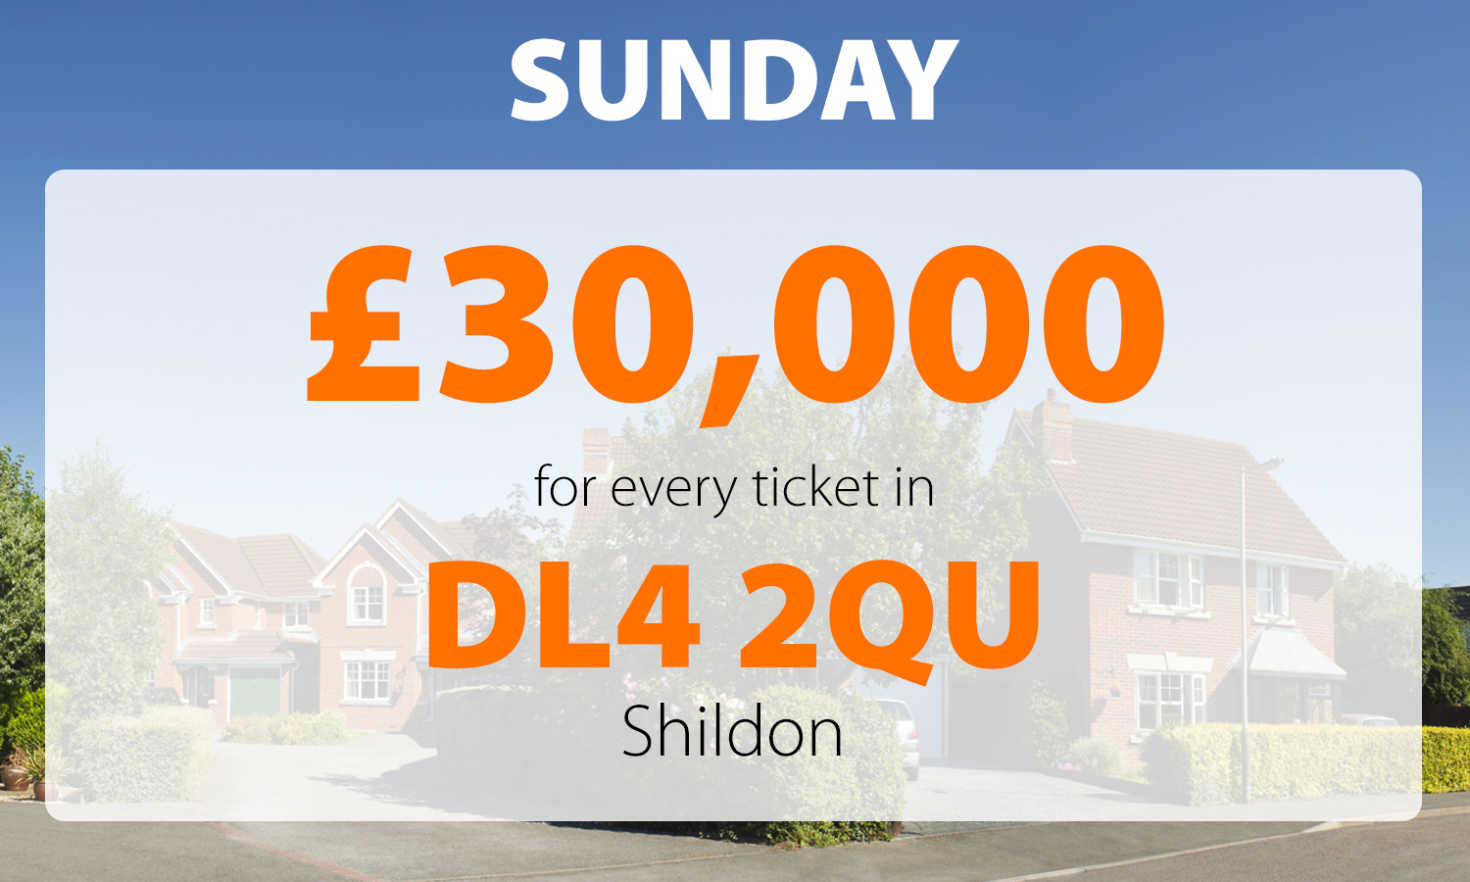 One lucky Shildon player has scooped a fabulous £30,000 prize